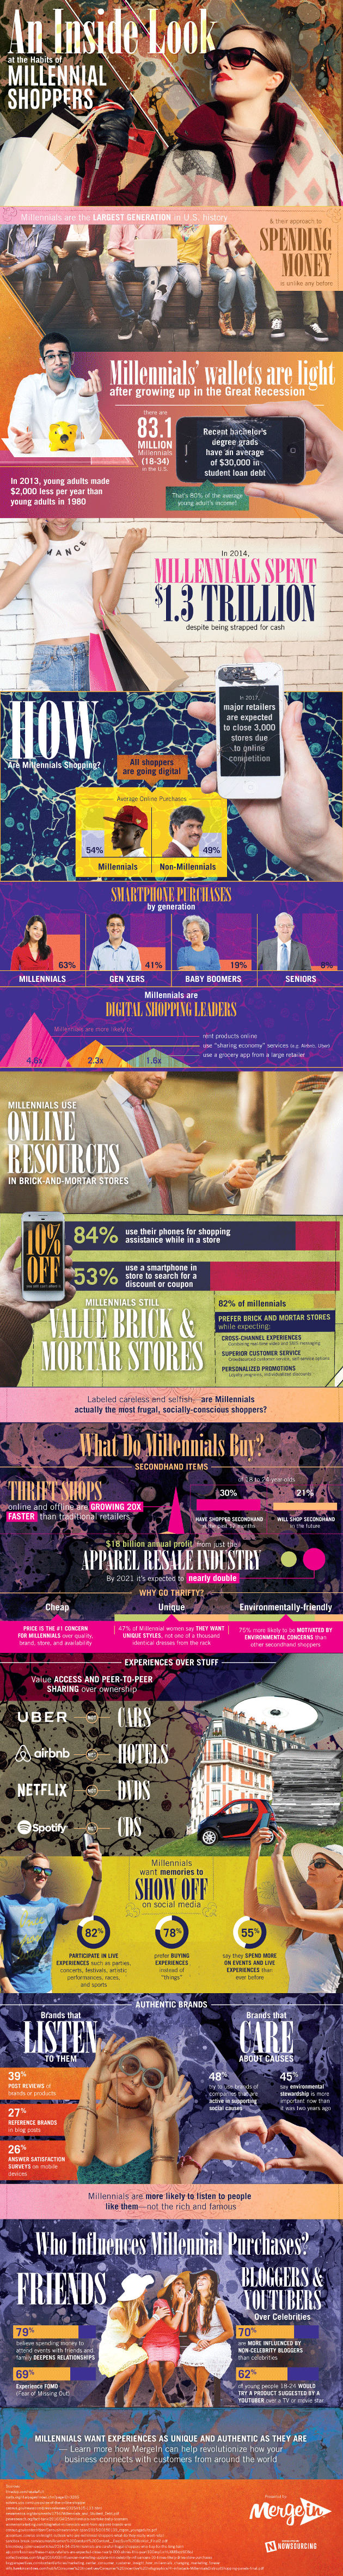 Inside Look at the Habits of Millennial Shoppers [Infographic]